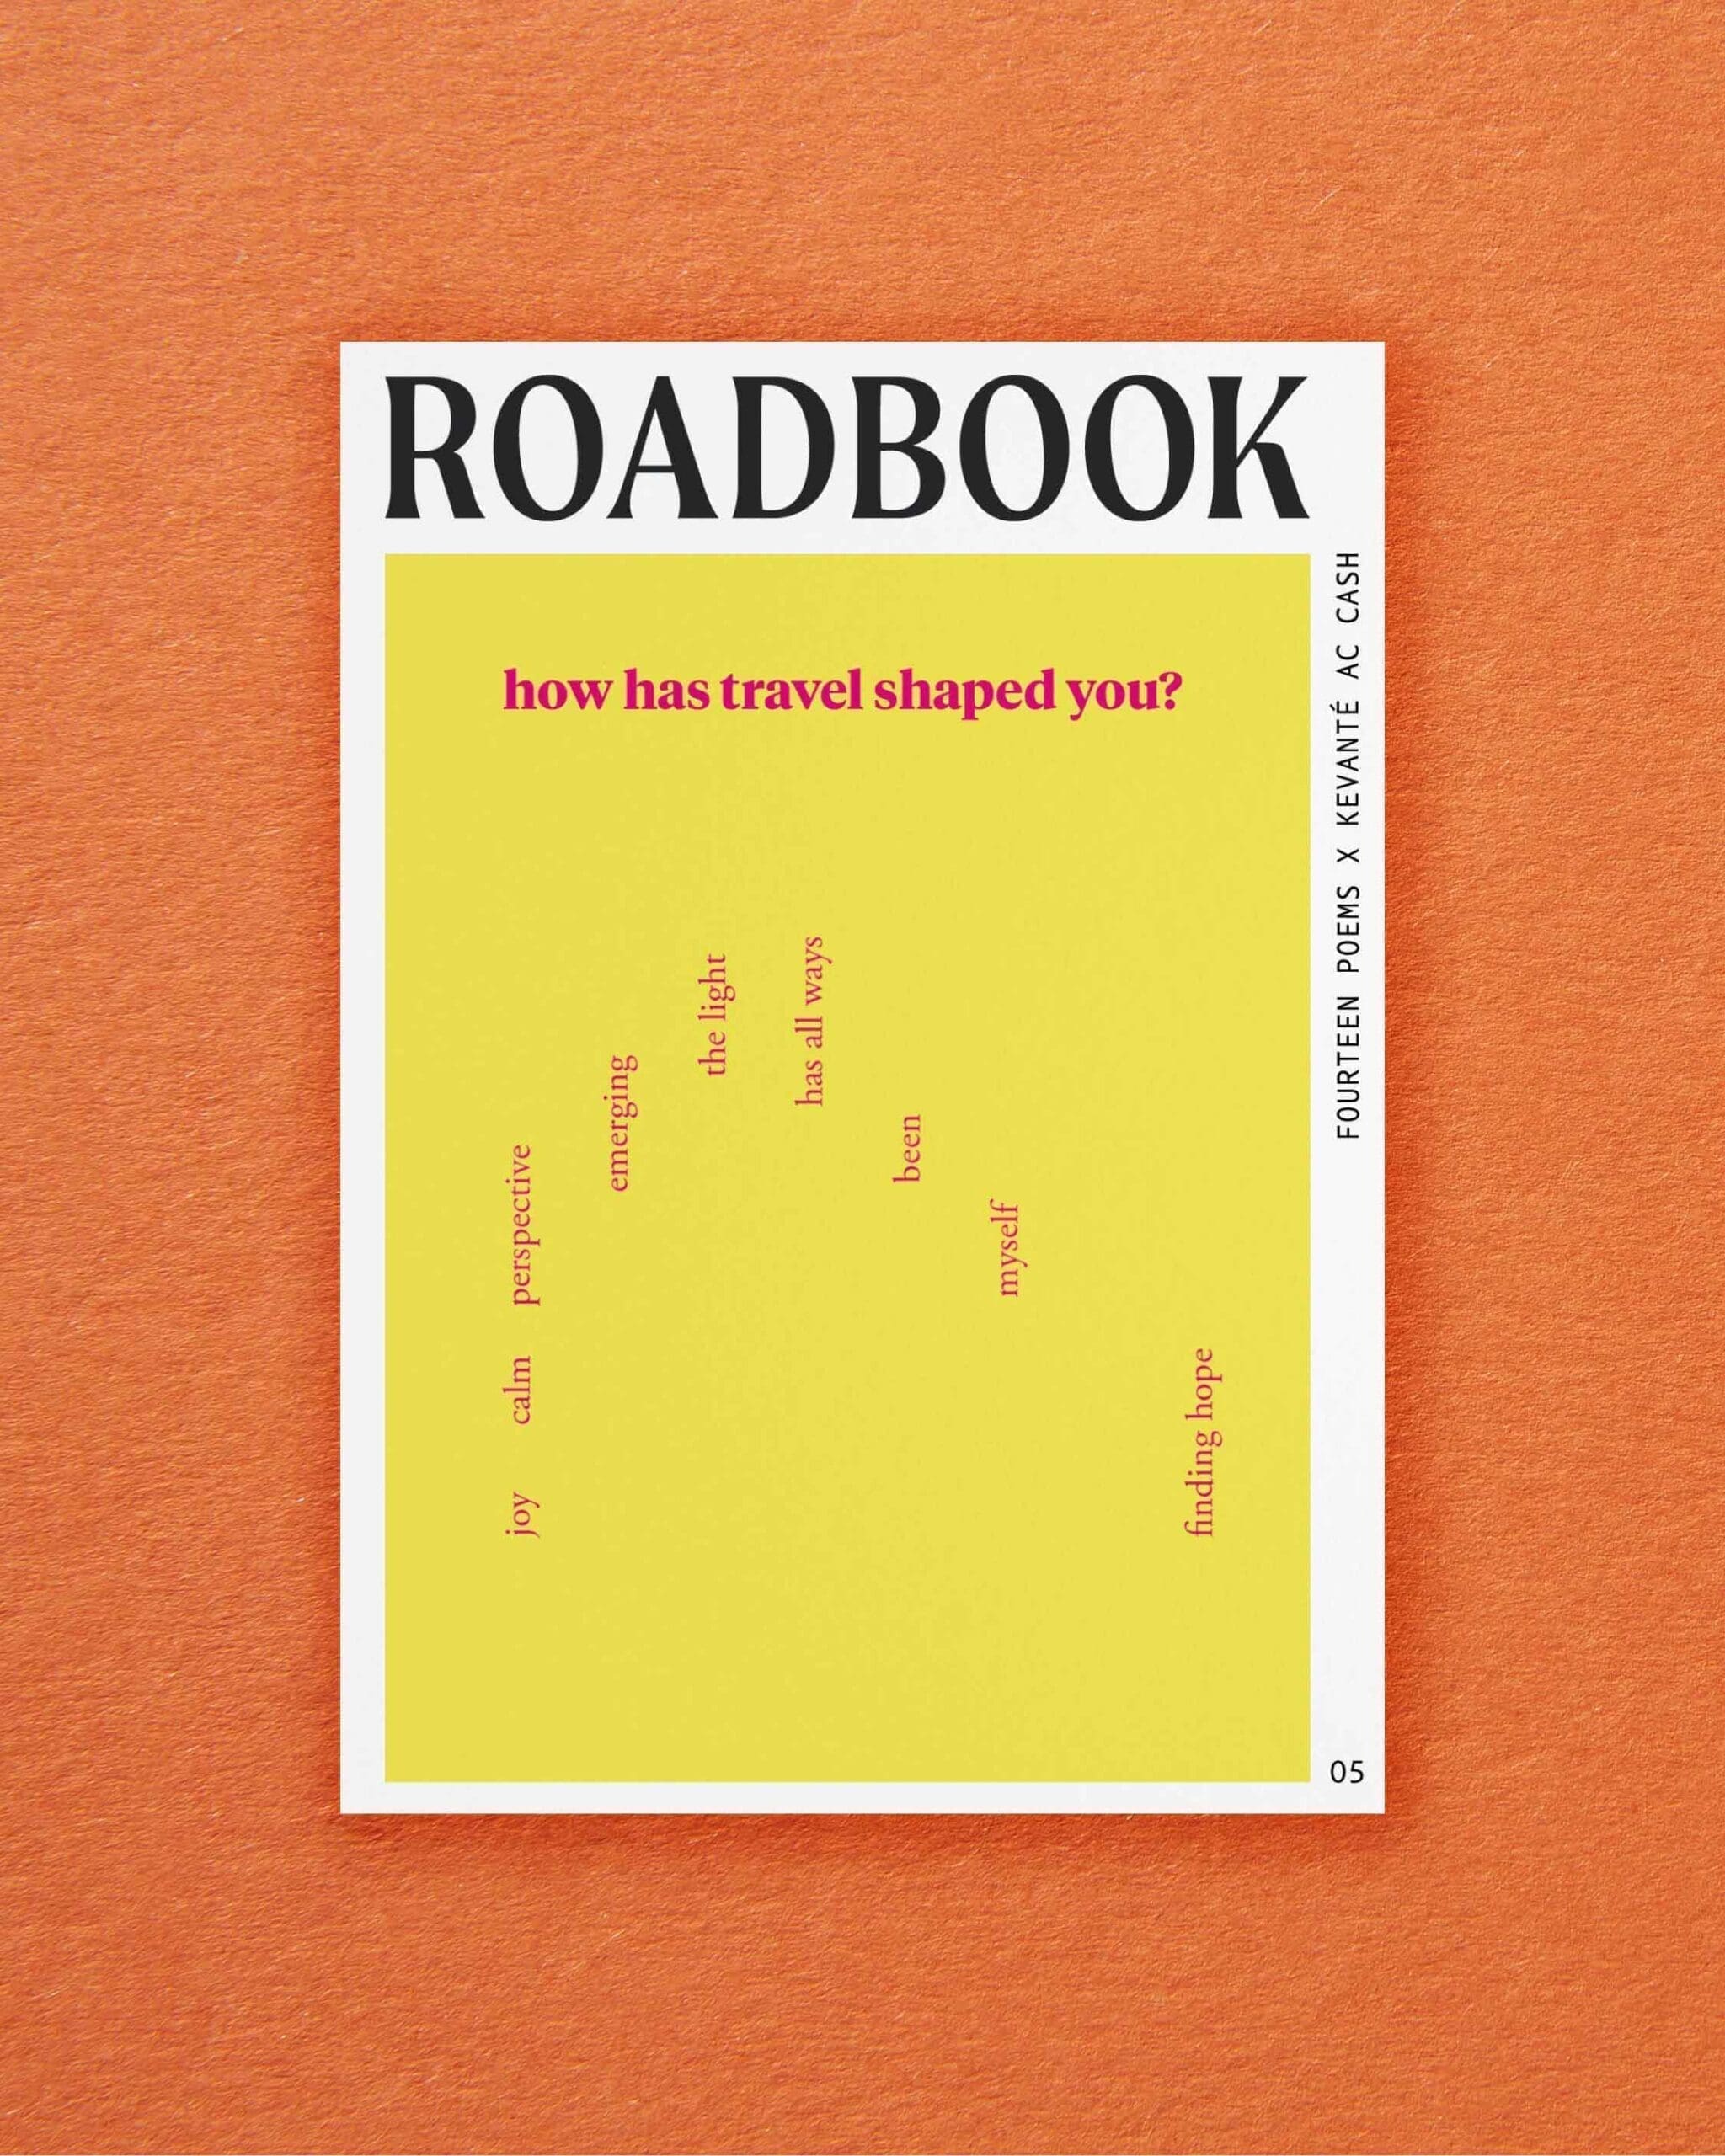 Postcards from ROADBOOK | A bright pink poem on a yellow background by Kevanté and 14 Poems